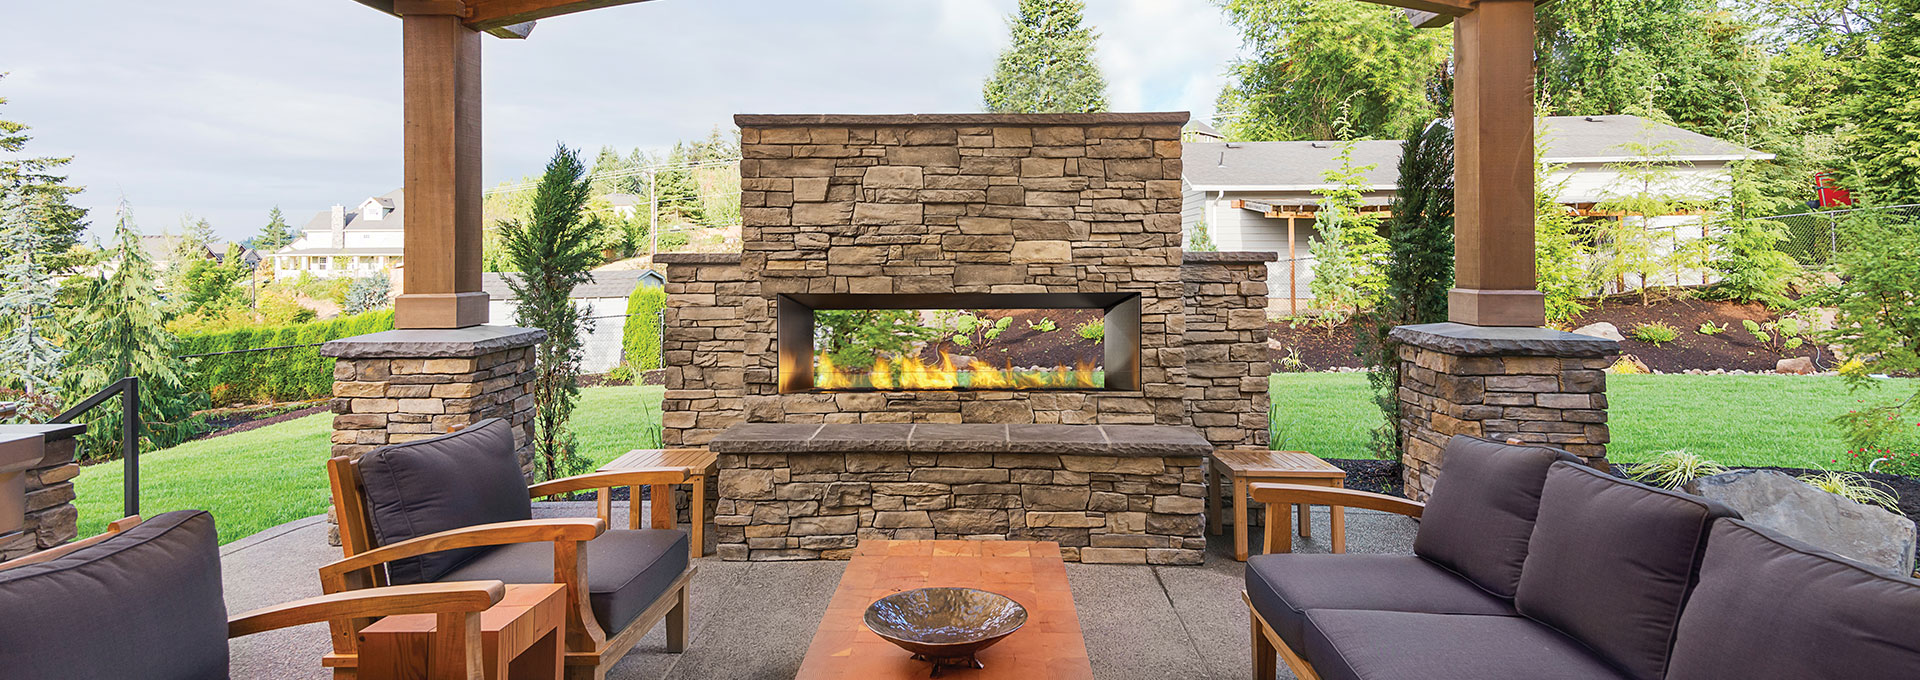 Outdoor Gas Fireplaces Fireplace Kits, How To Frame An Outdoor Gas Fireplace